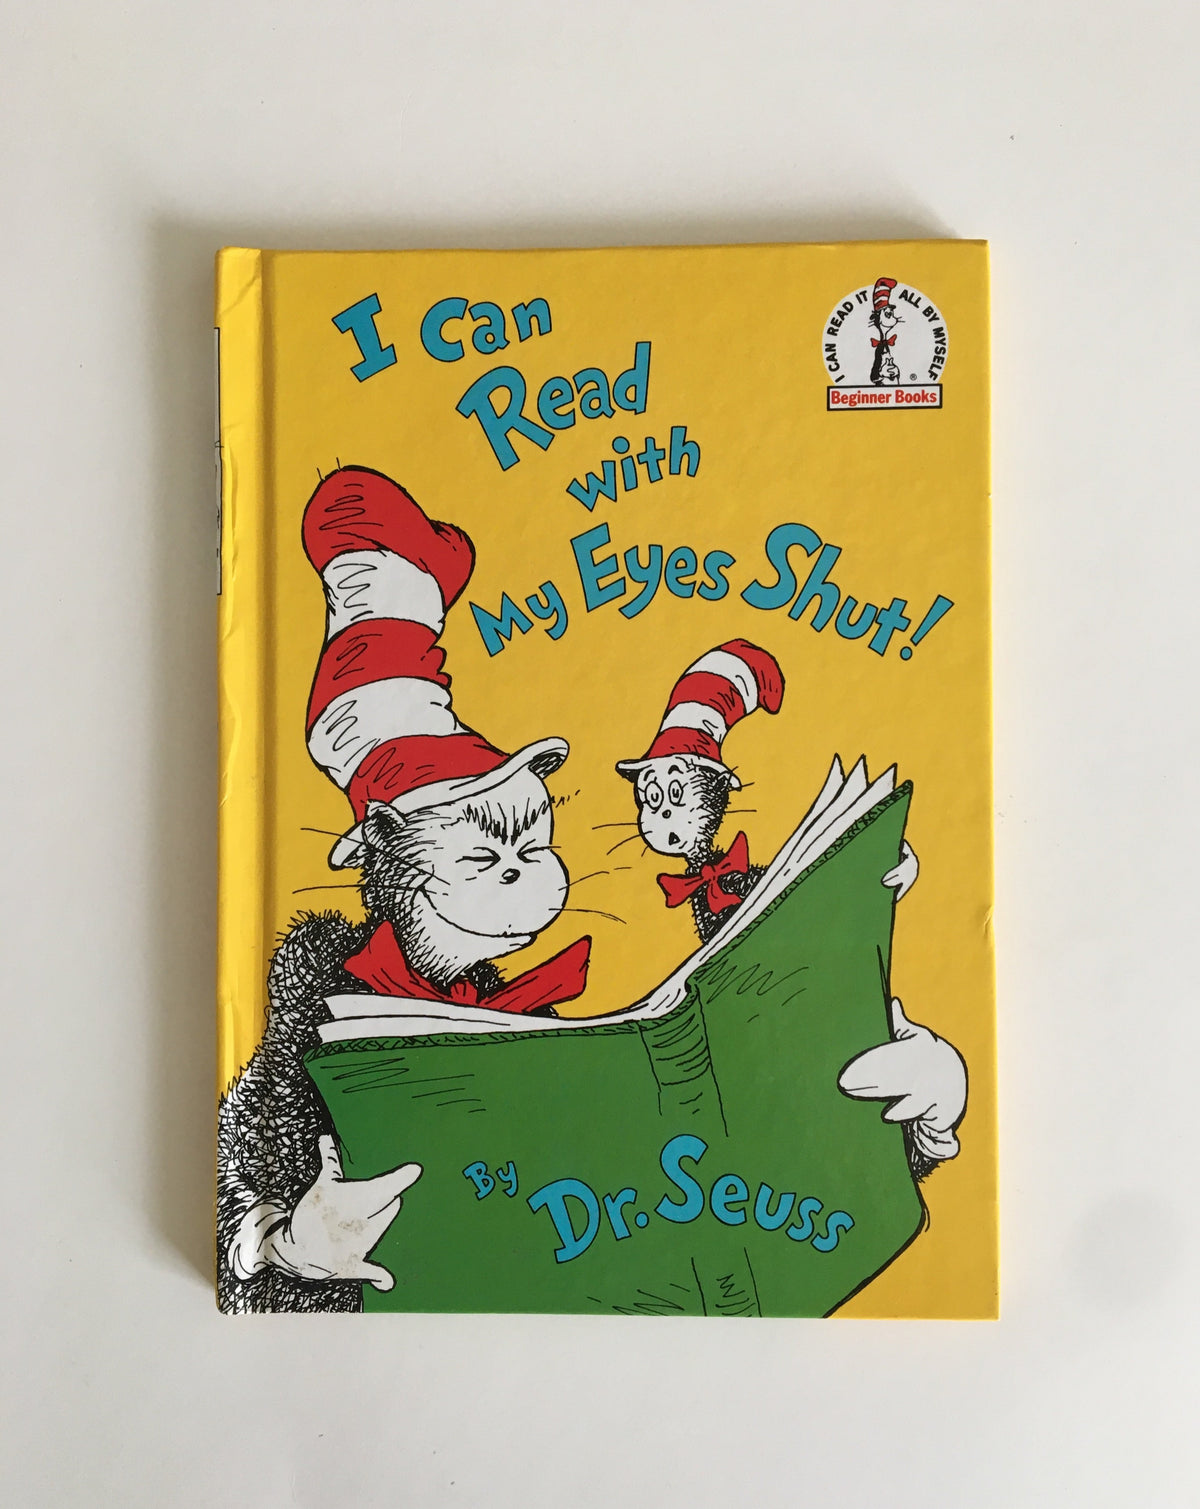 I Can Read with my Eyes Shut! by Dr. Seuss